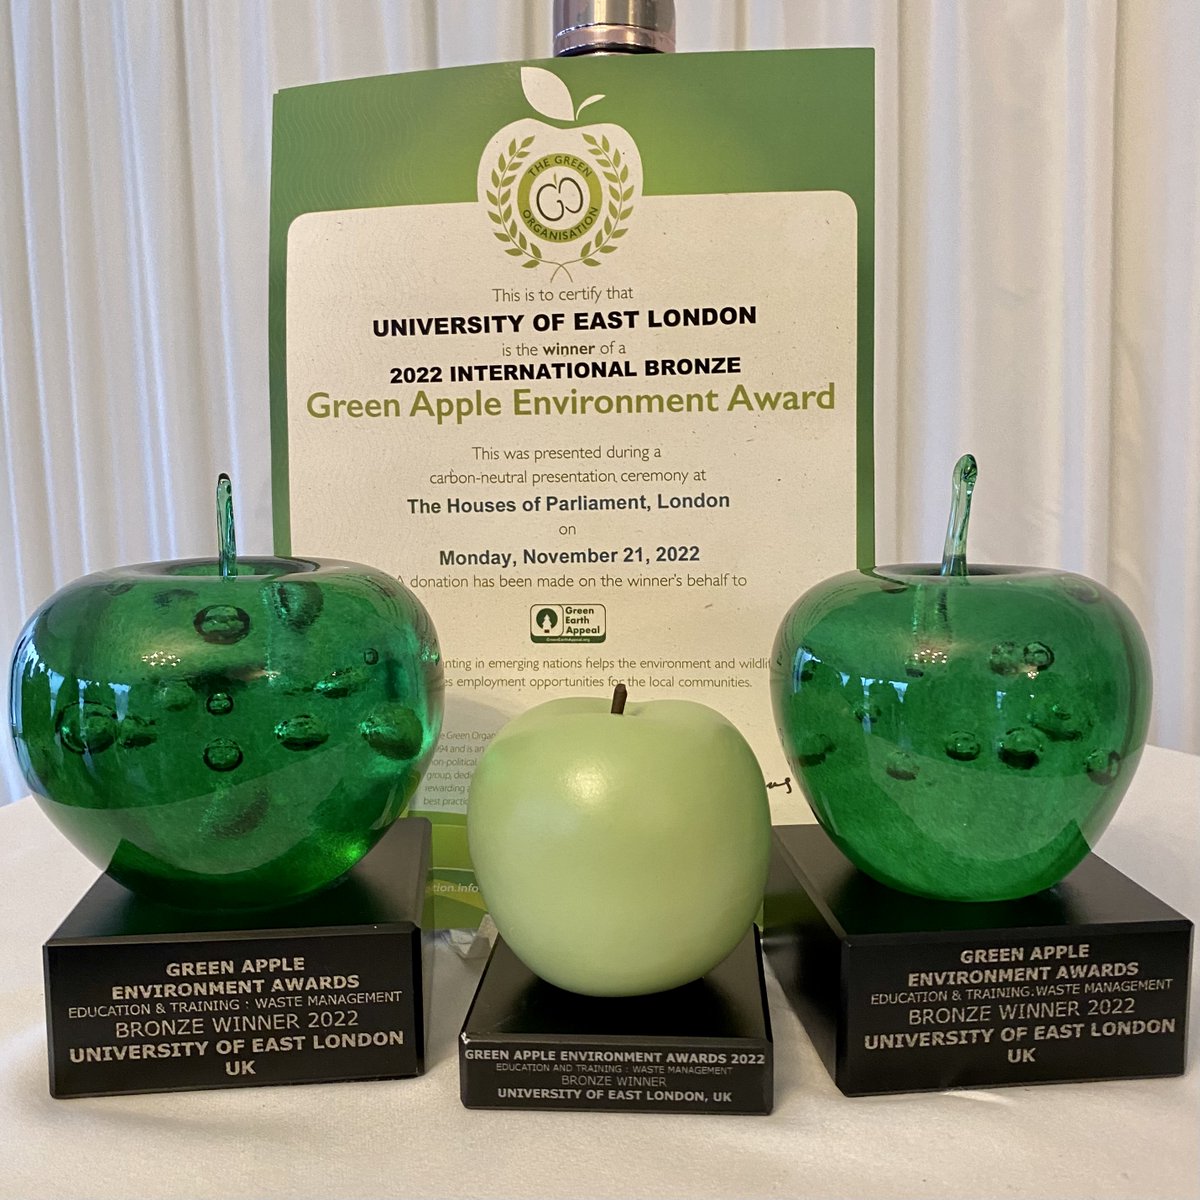 Yesterday, our 'Rubbish Christmas Game' scooped a bronze Green Apple Environment Award in the category of Education and Training: Waste Management.

Read more here: uel.ac.uk/about-uel/news… @TheGreenOrg #Sustainability #UELSustainability